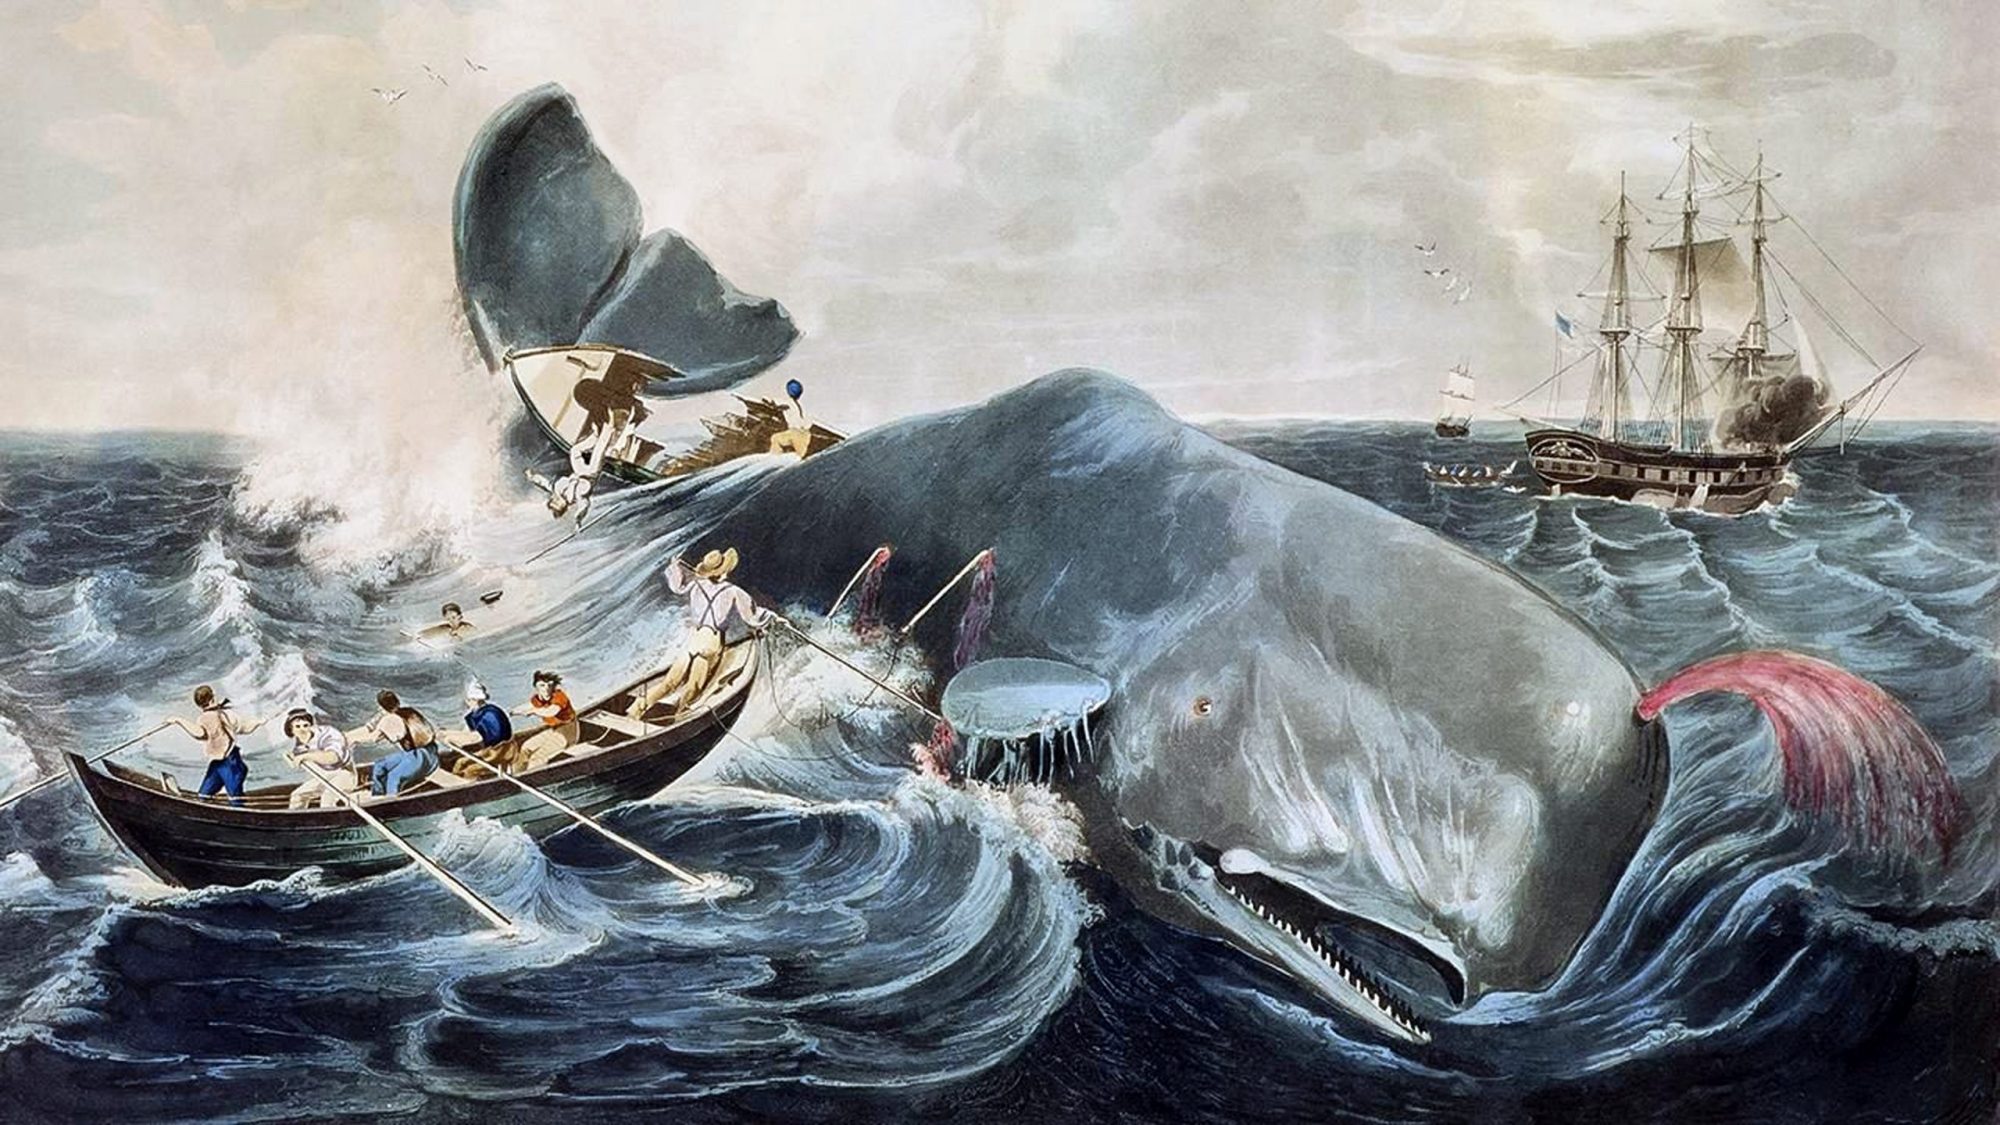 A model for Herman Melville's Moby Dick (1851): 'Capturing a Sperm Whale', colored engraving by J. Hill, 1835, after William Page (1811-1885).